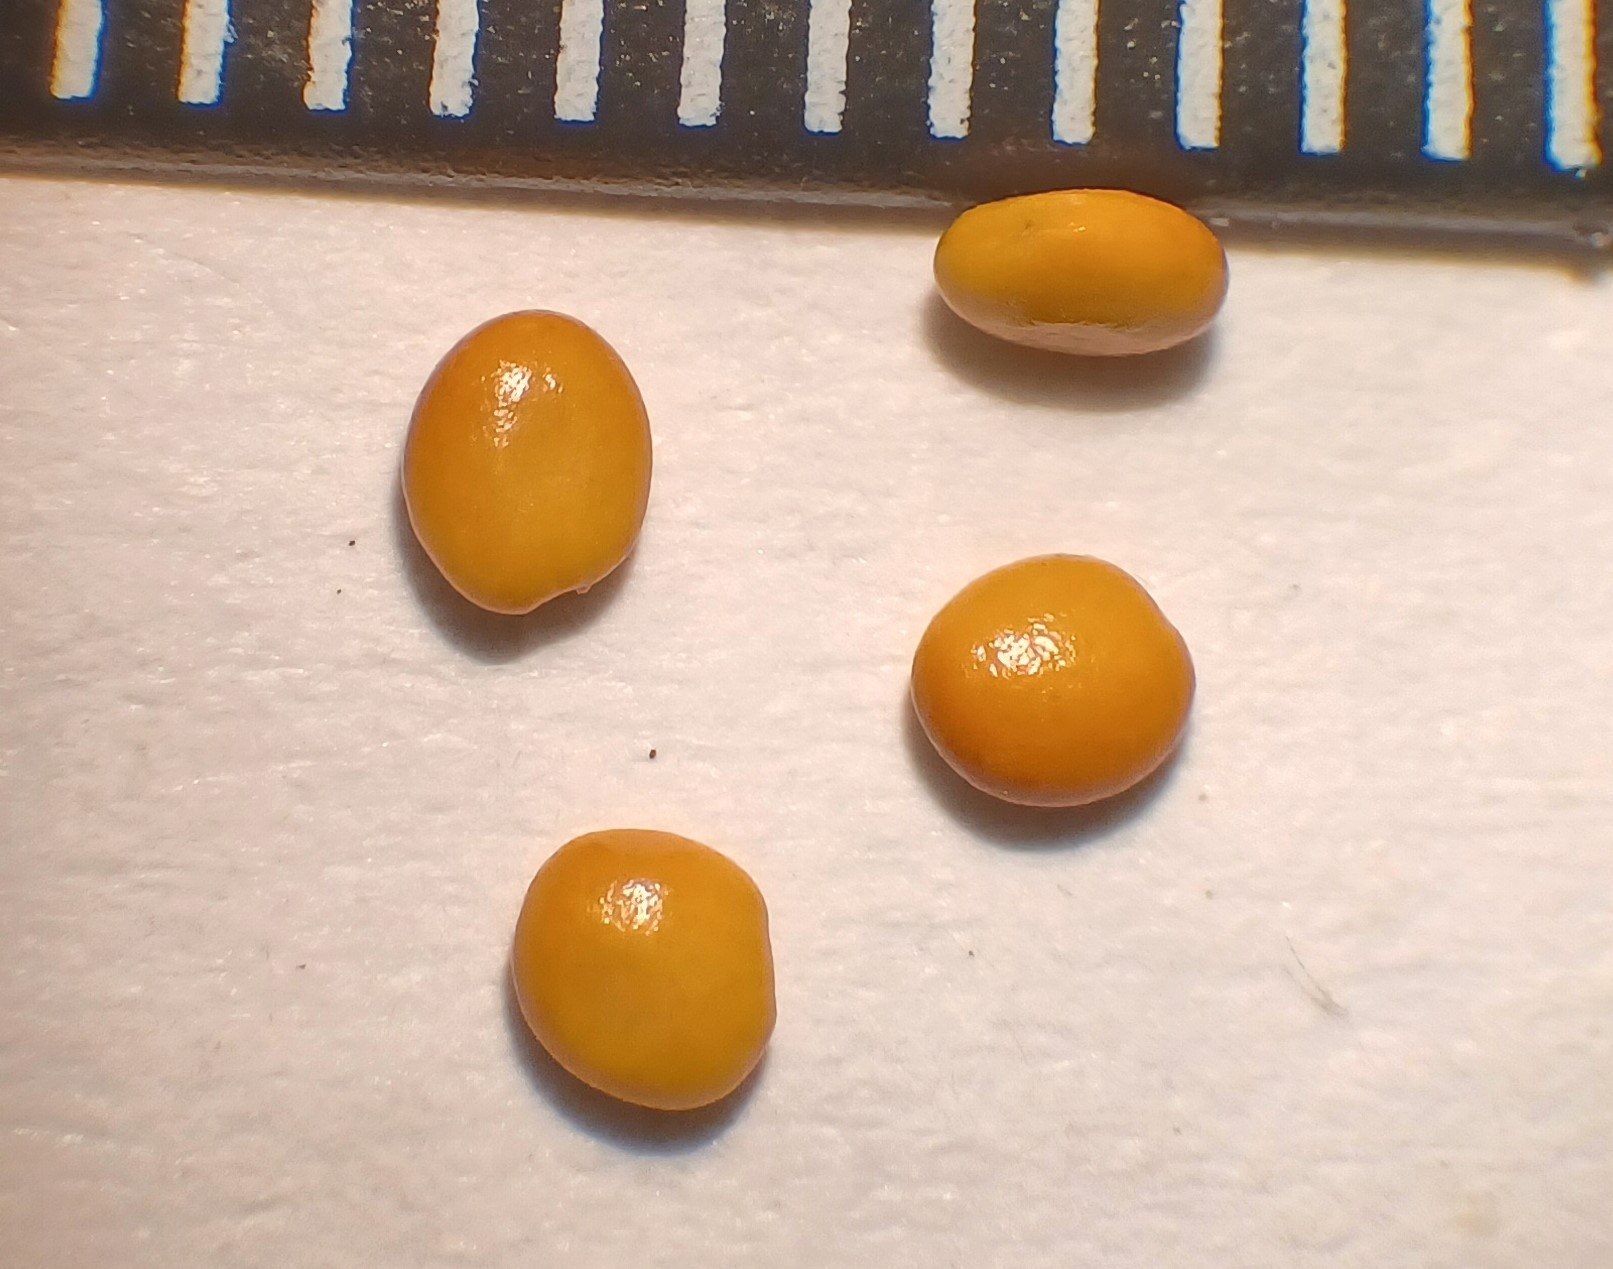 Menyanthes trifoliata seeds with a mm ruler on top.